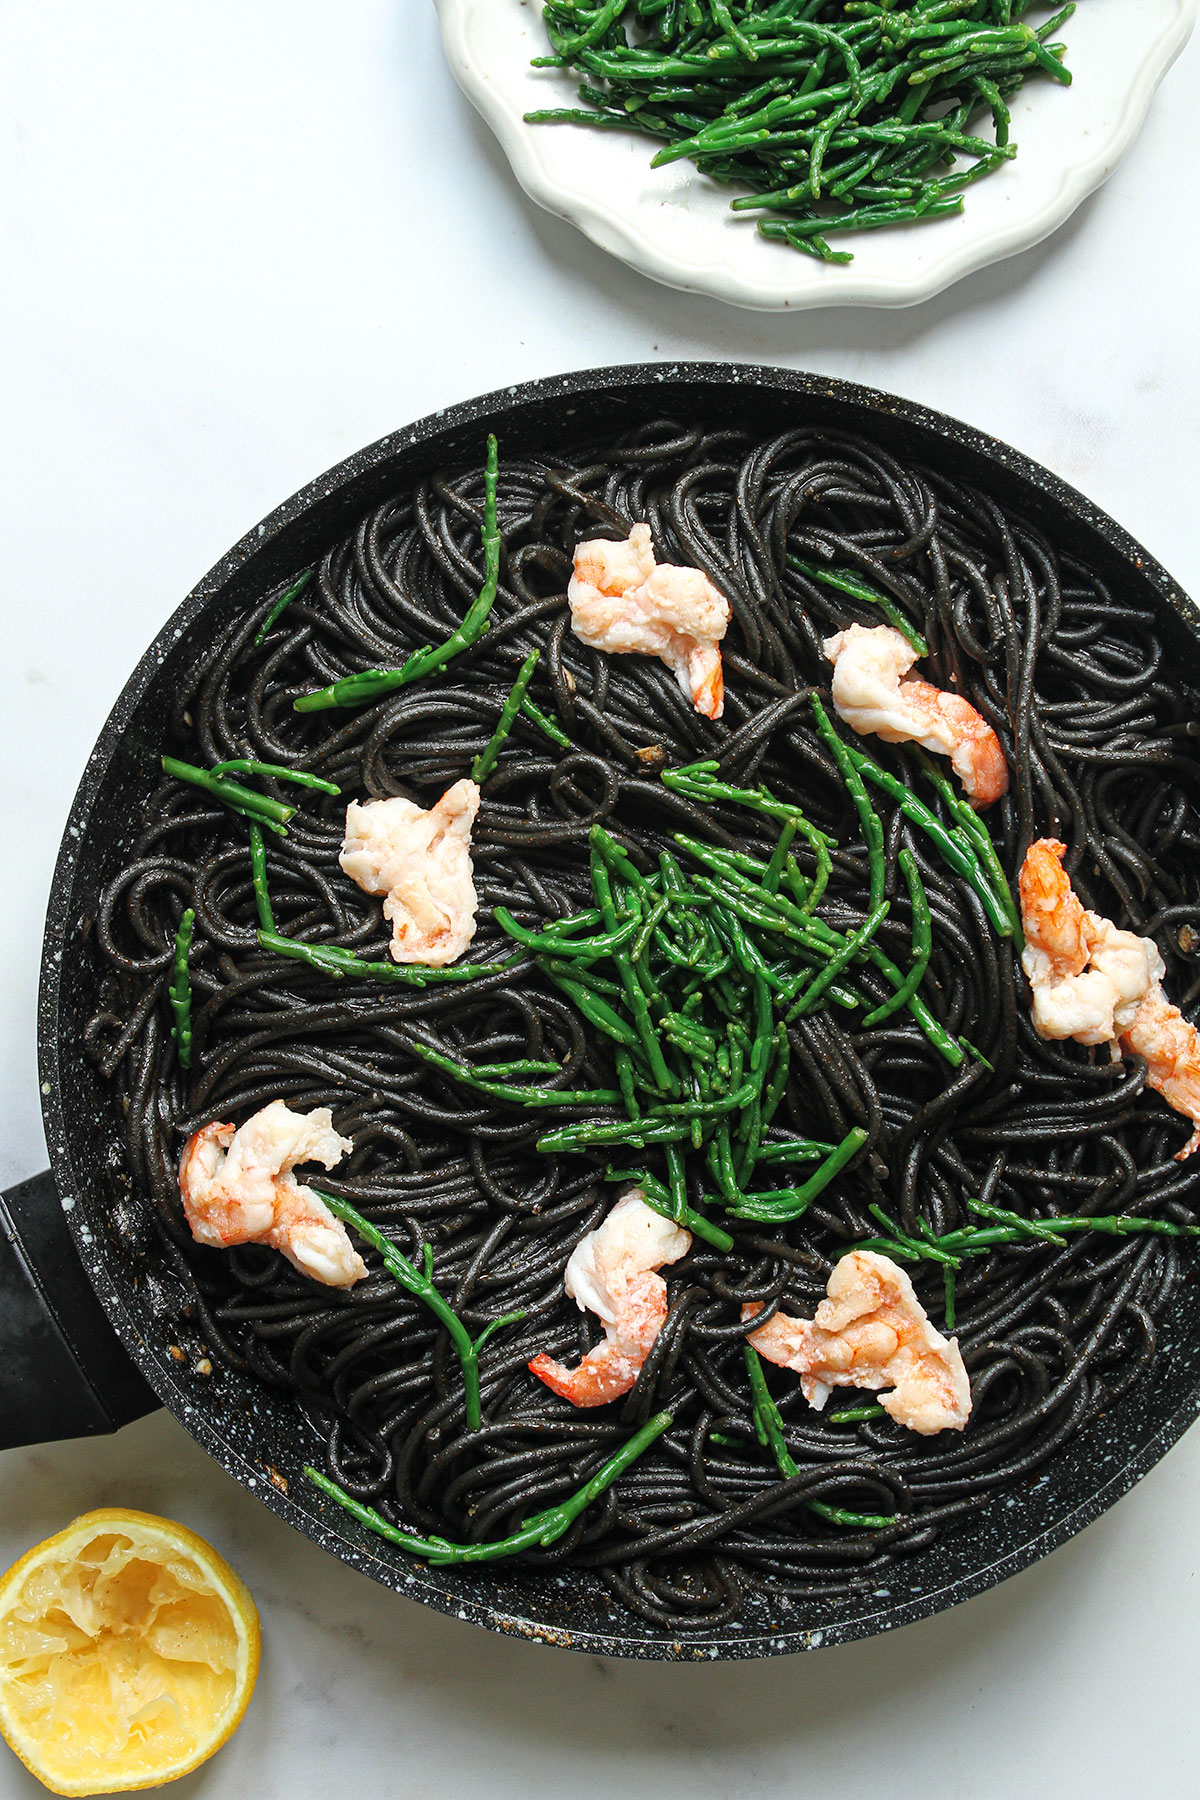 The cooked squid ink pasta served with cooked prawns, samphire and lemon juice with a plate of samphire and a squeezed half lemon.